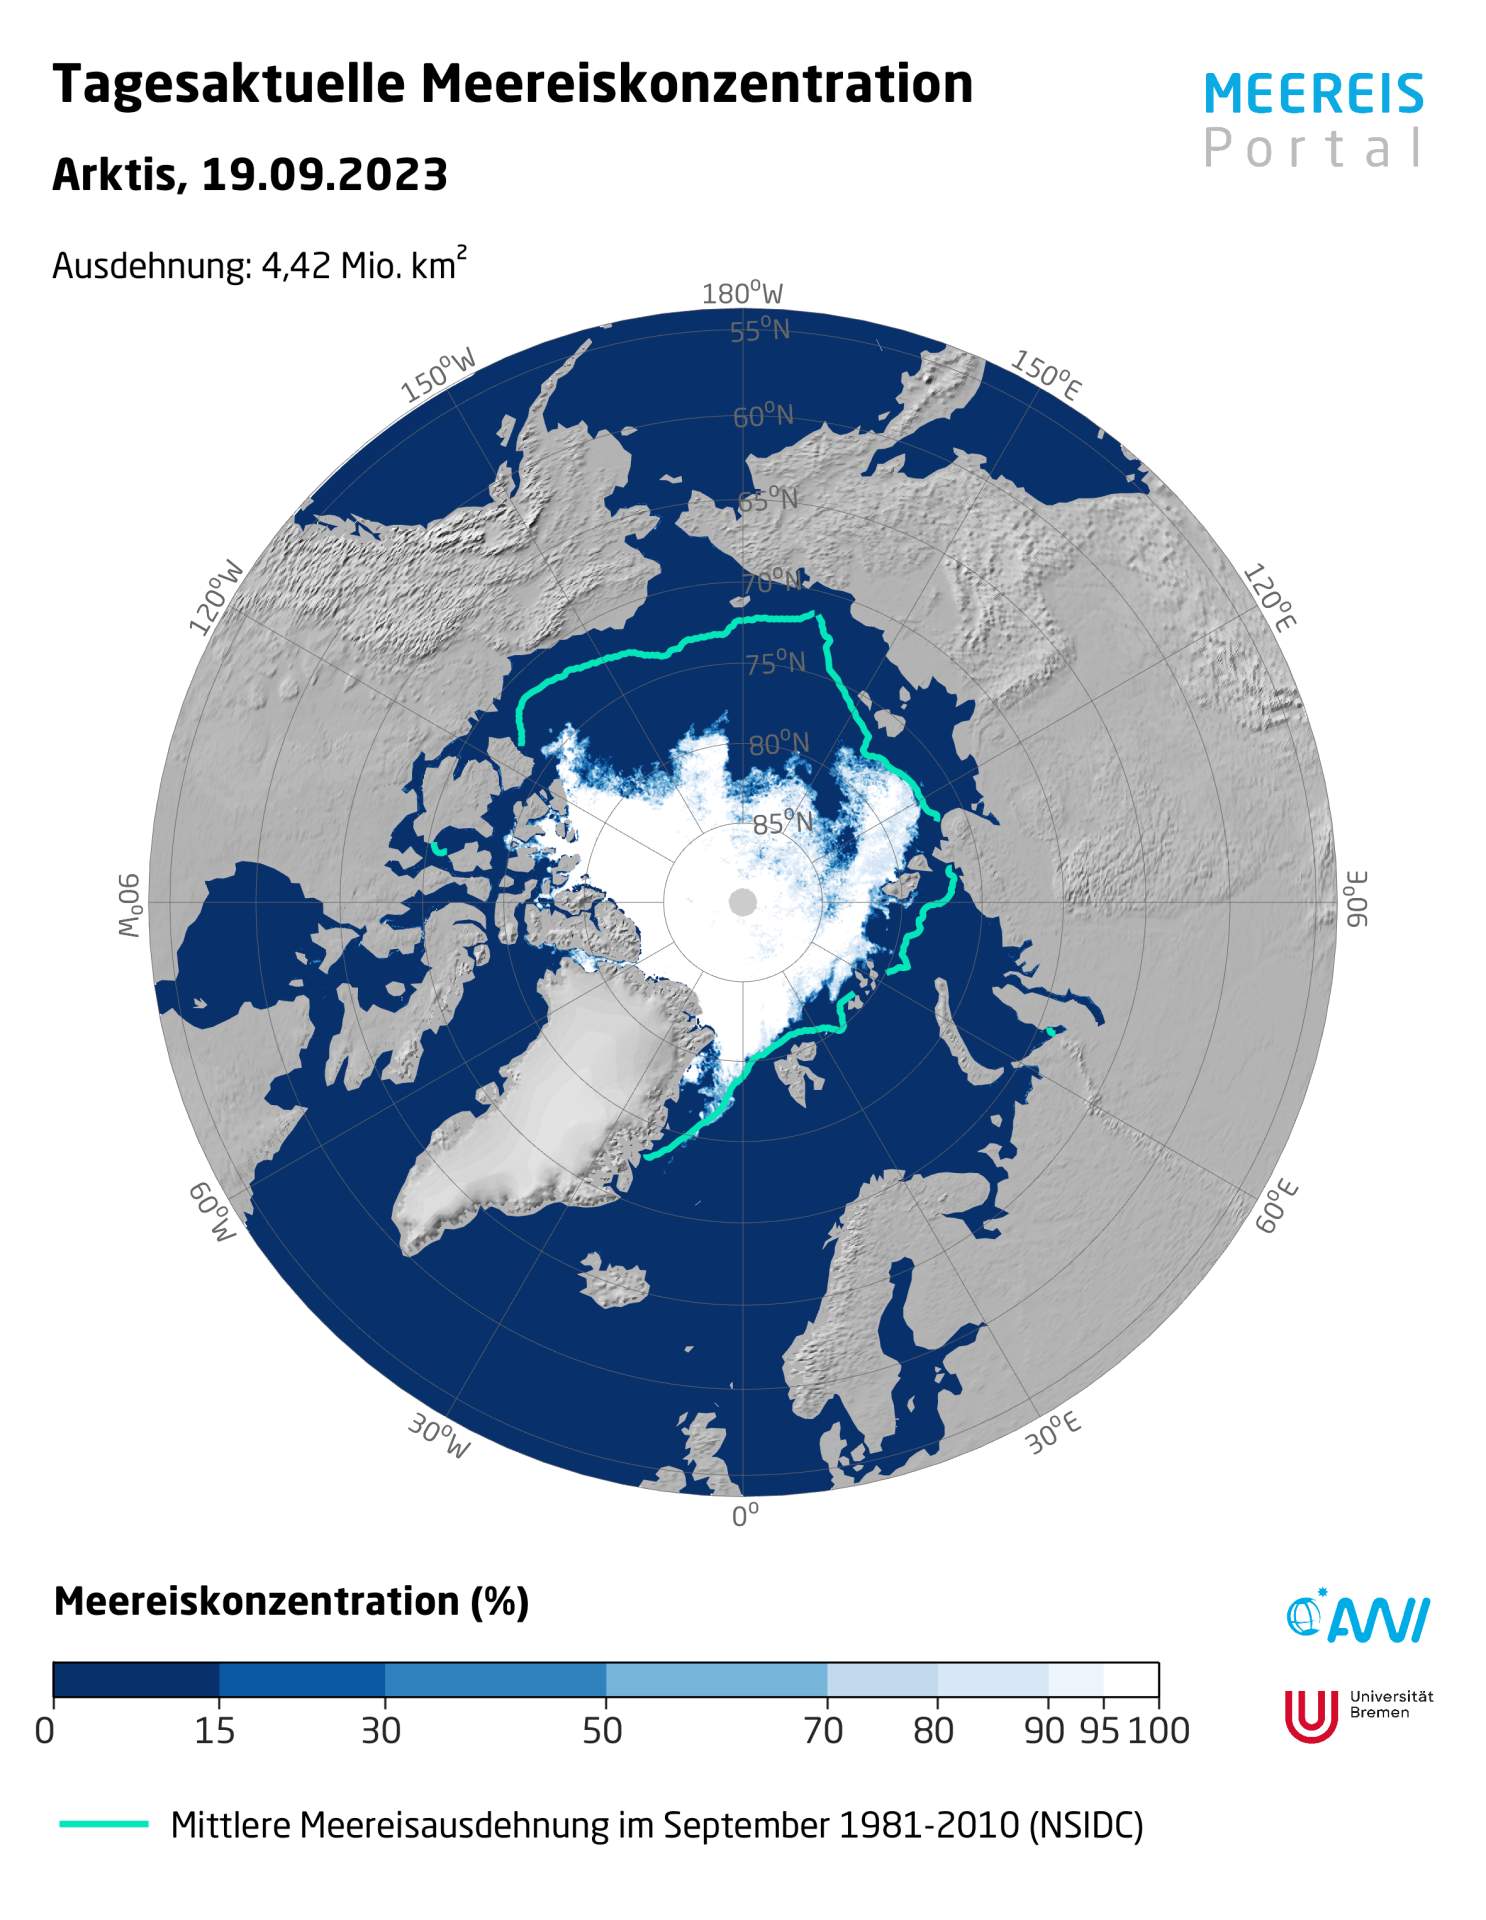 Fig. 1: Sea ice concentration in the Arctic compared to normal; Source: Meereisportal